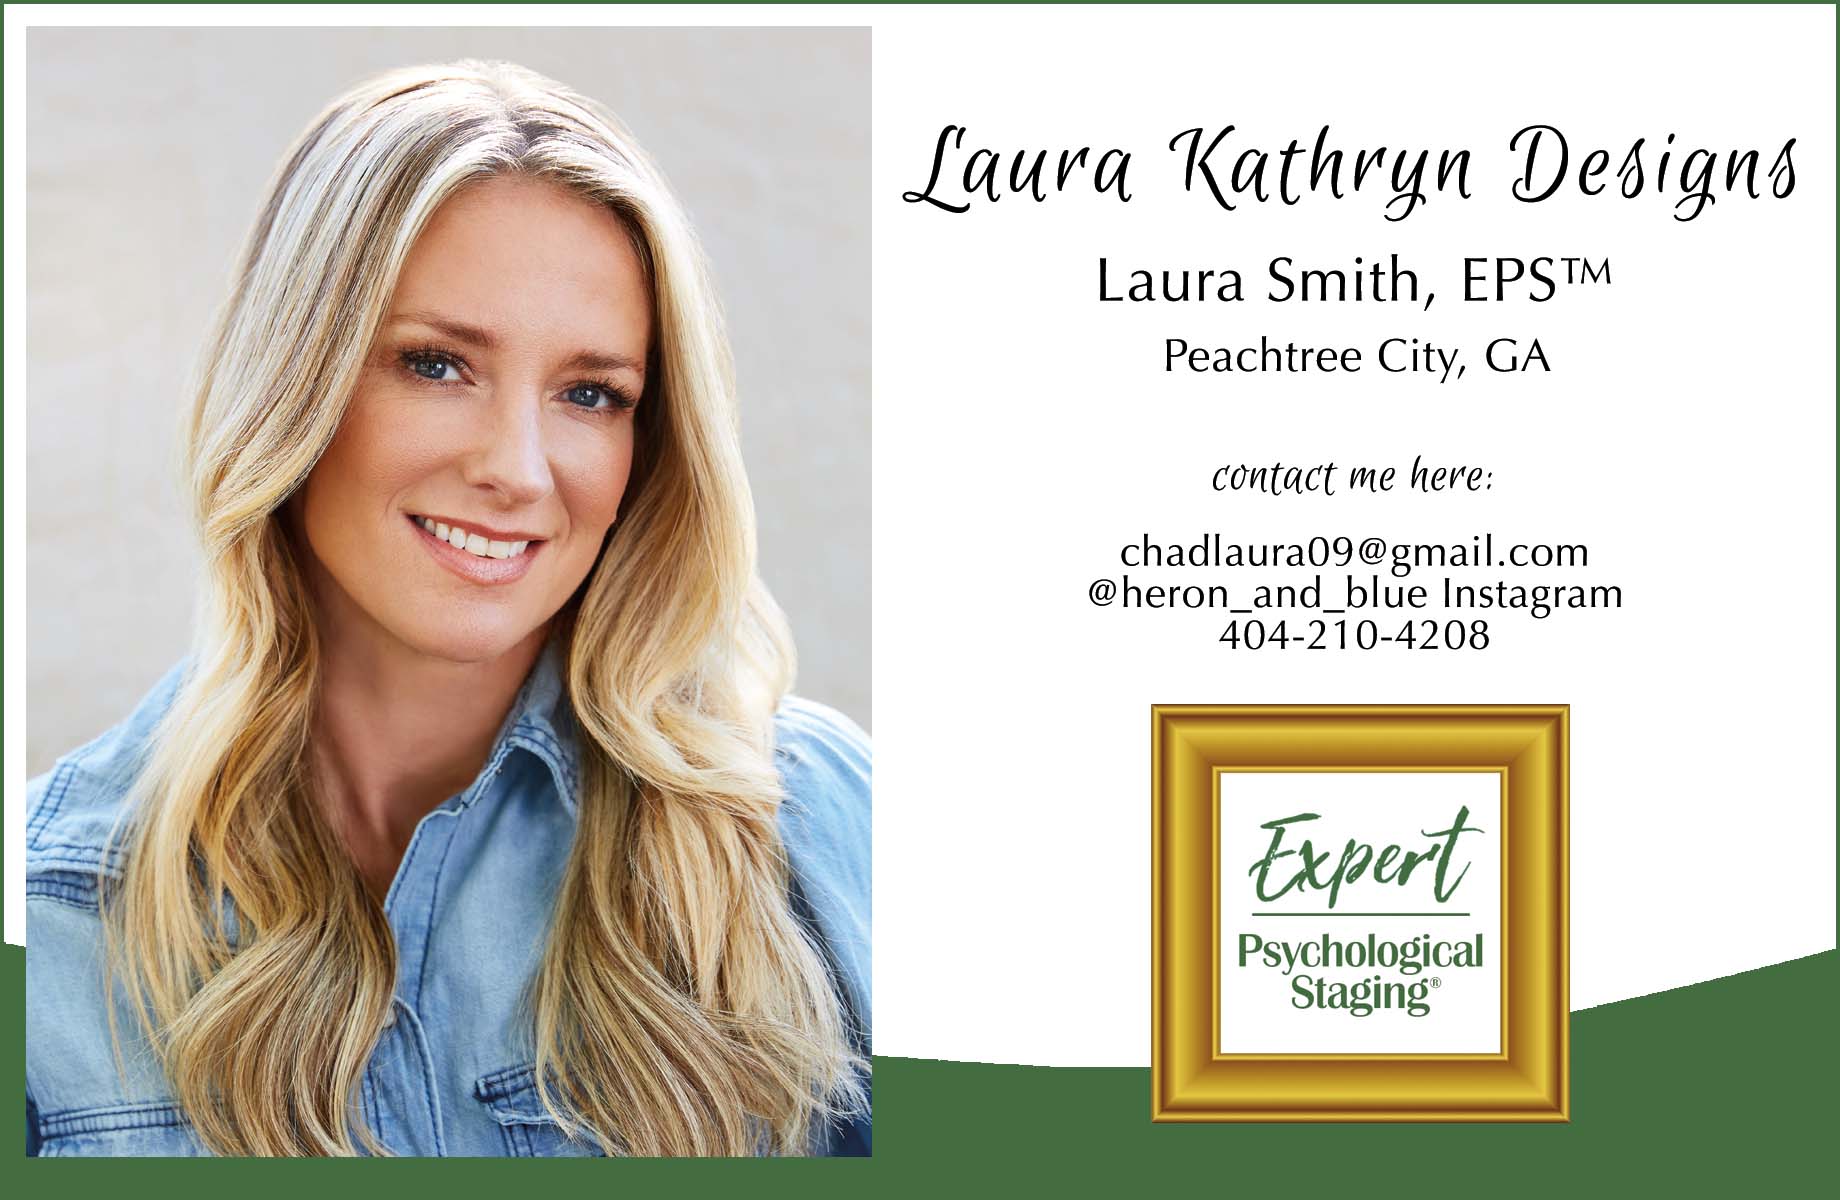 Laura Kathryn - Expert Psychological Staging Peachtree City, GA